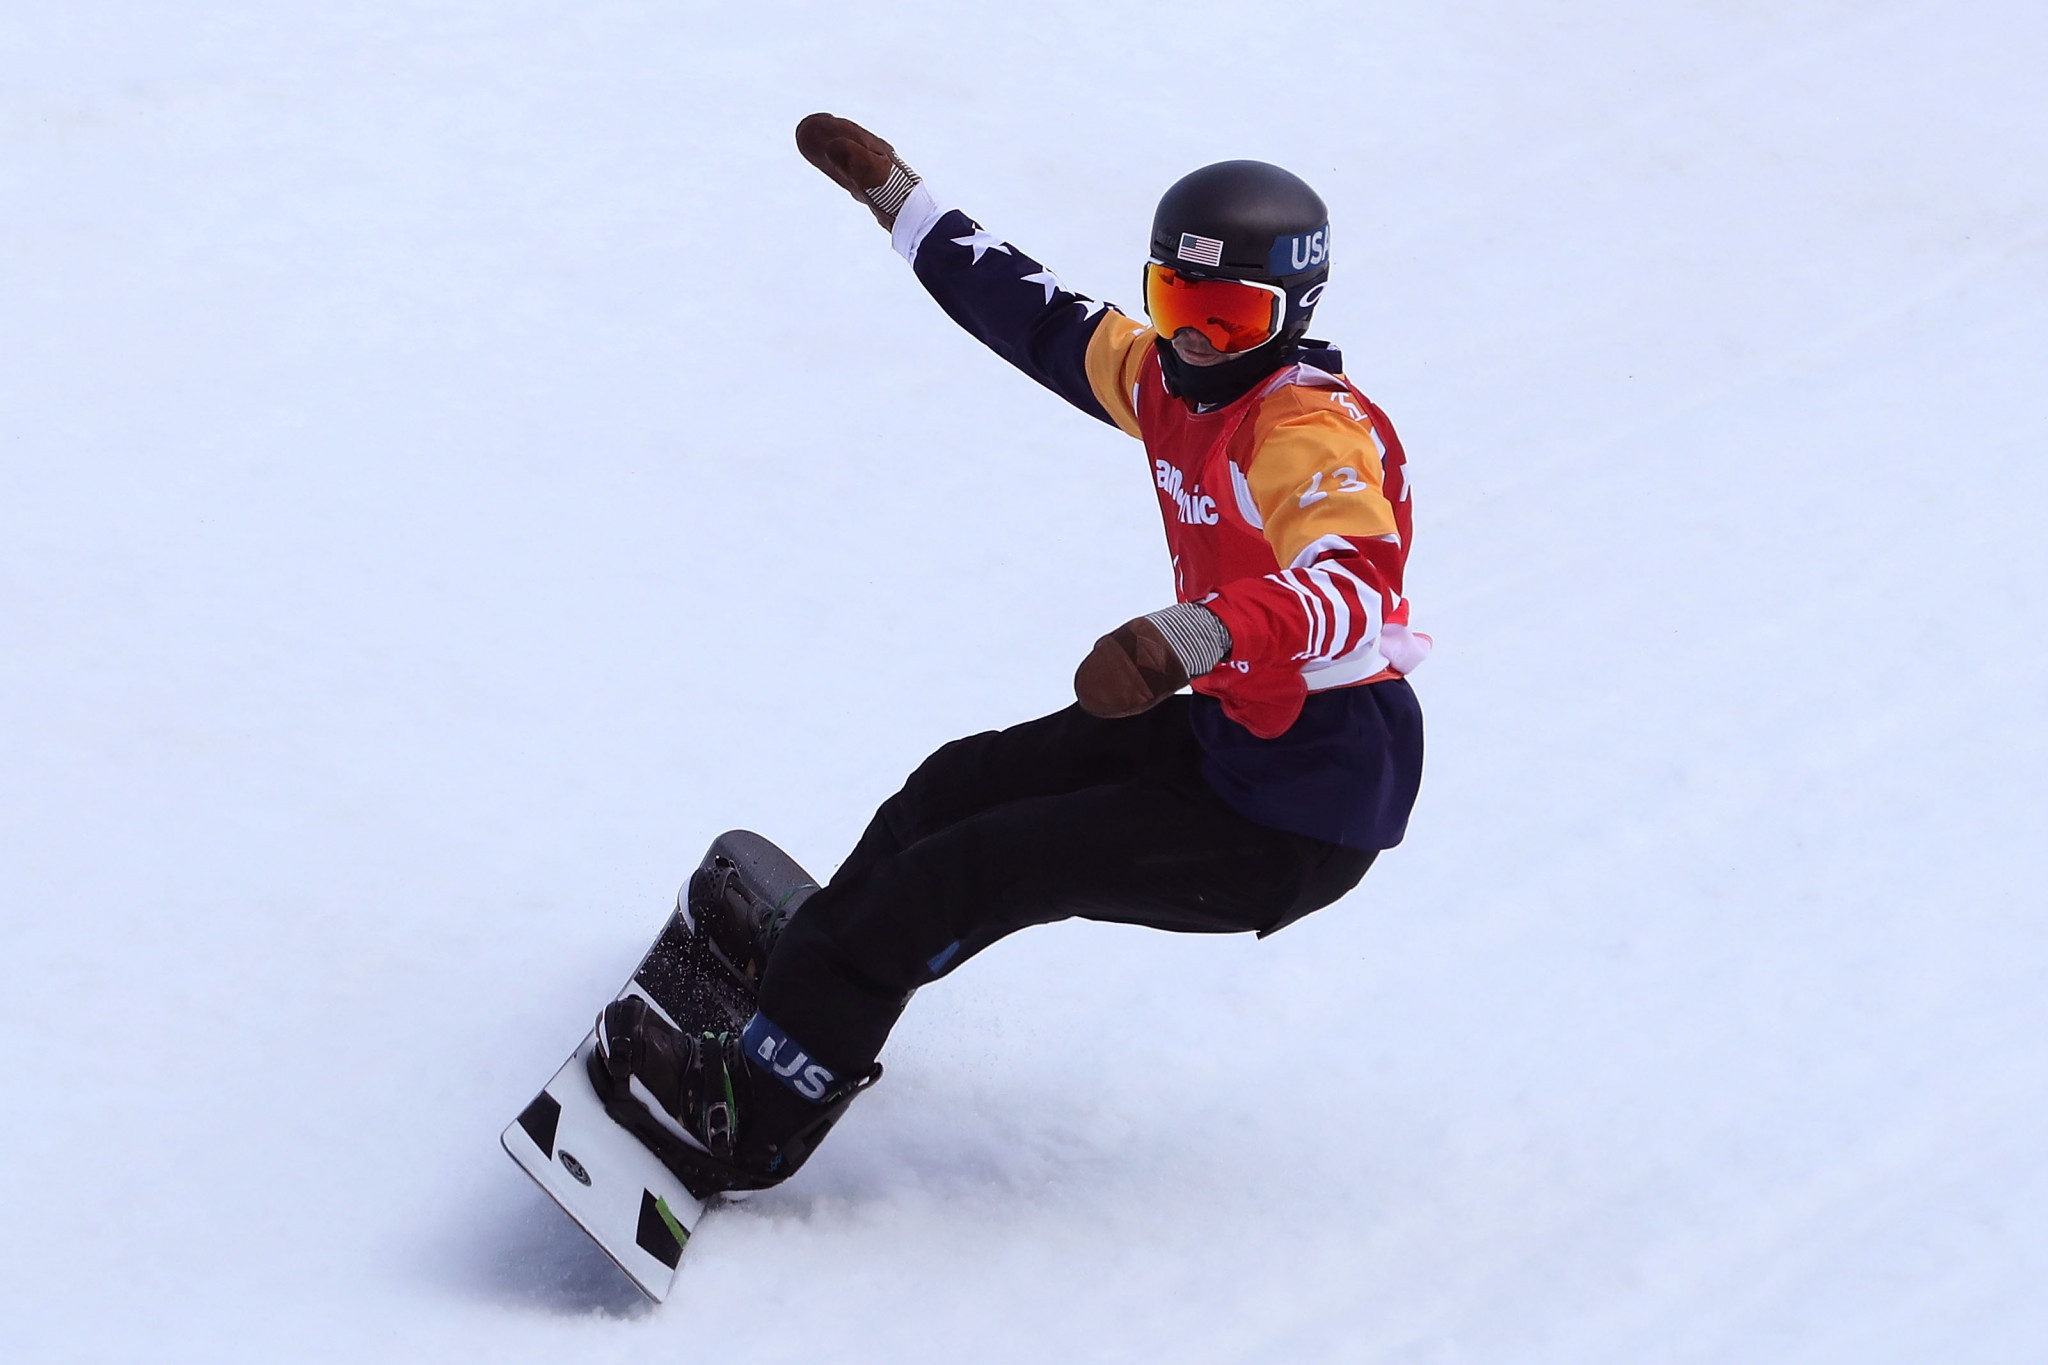 The United States were dominant at the FIS Para Snowboard World Championships, claiming 10 more medals than second place Italy ©Team USA/Twitter